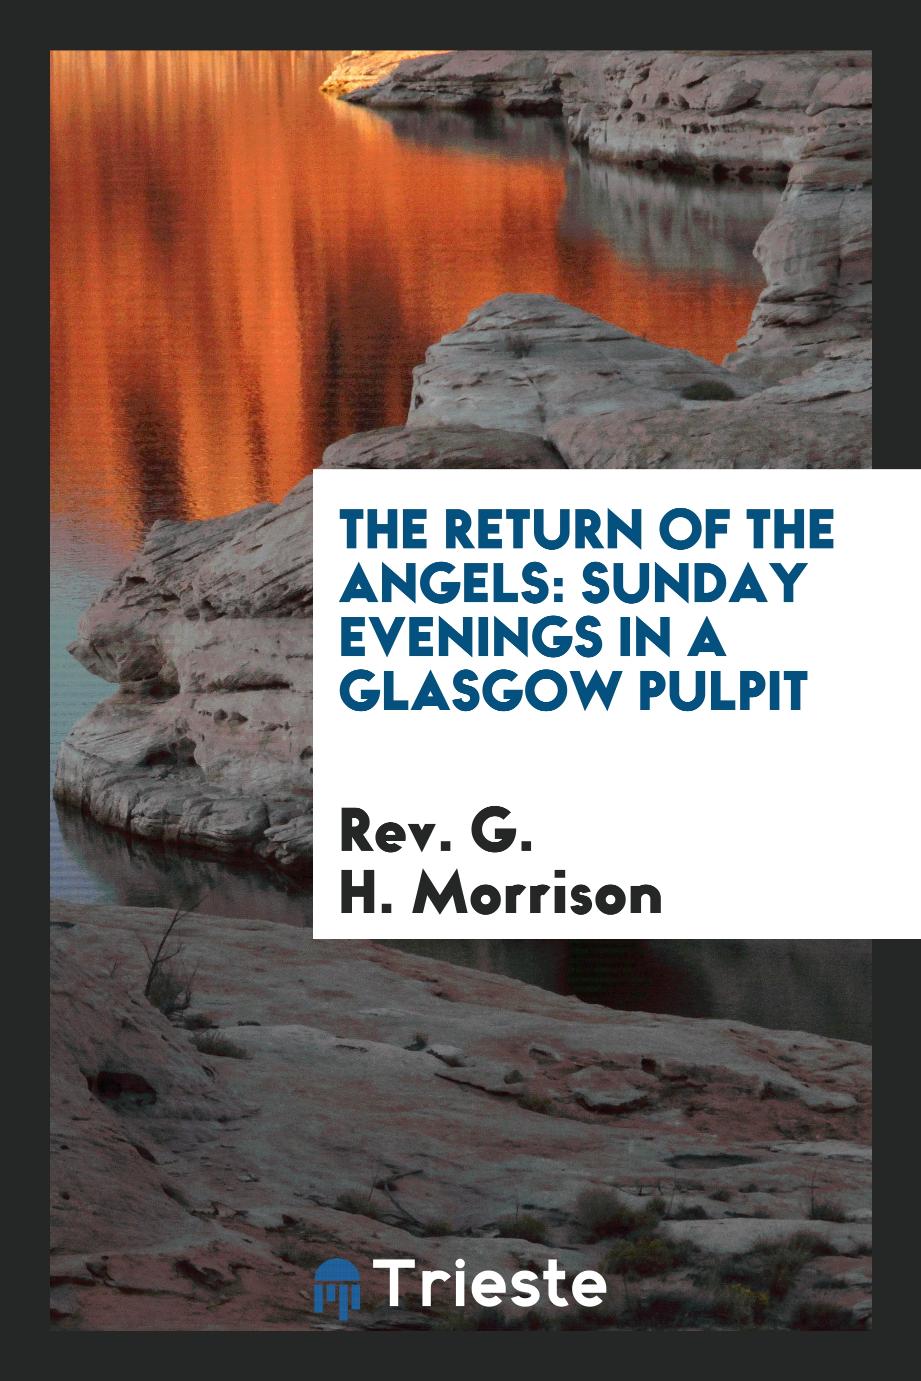 The Return of the Angels: Sunday Evenings in a Glasgow Pulpit